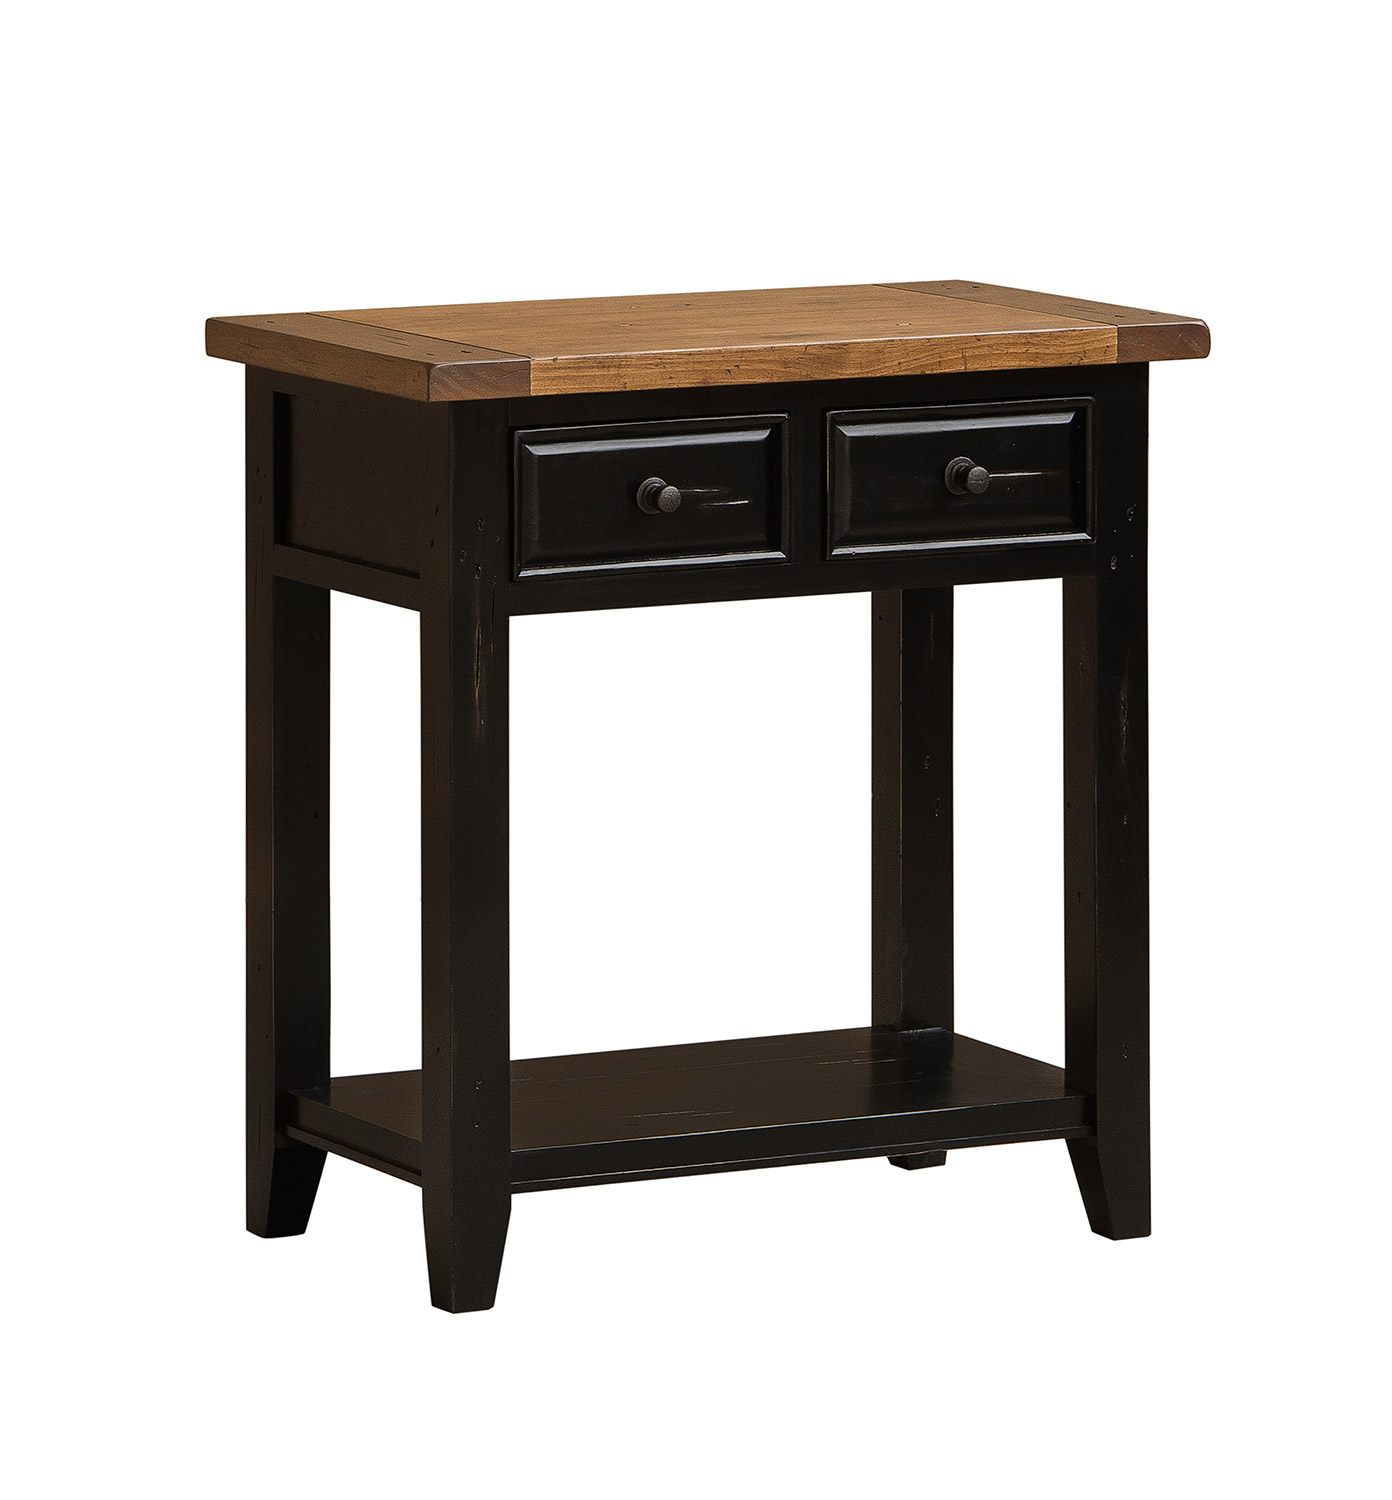 Hillsdale Tuscan Retreat 2 Drawer Hall Console Table - Black/Oxford